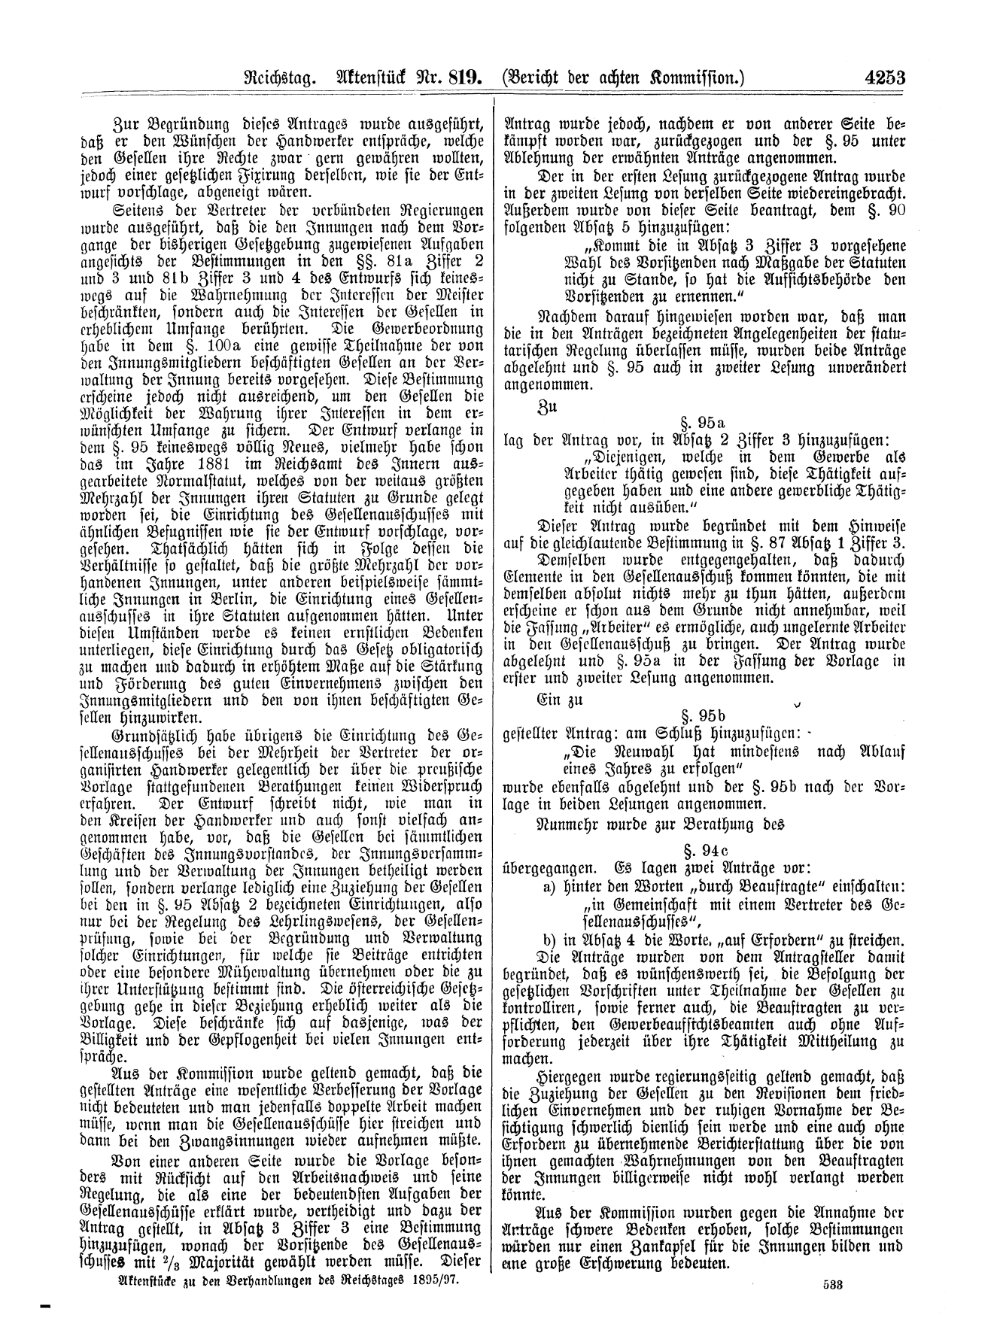 Scan of page 4253